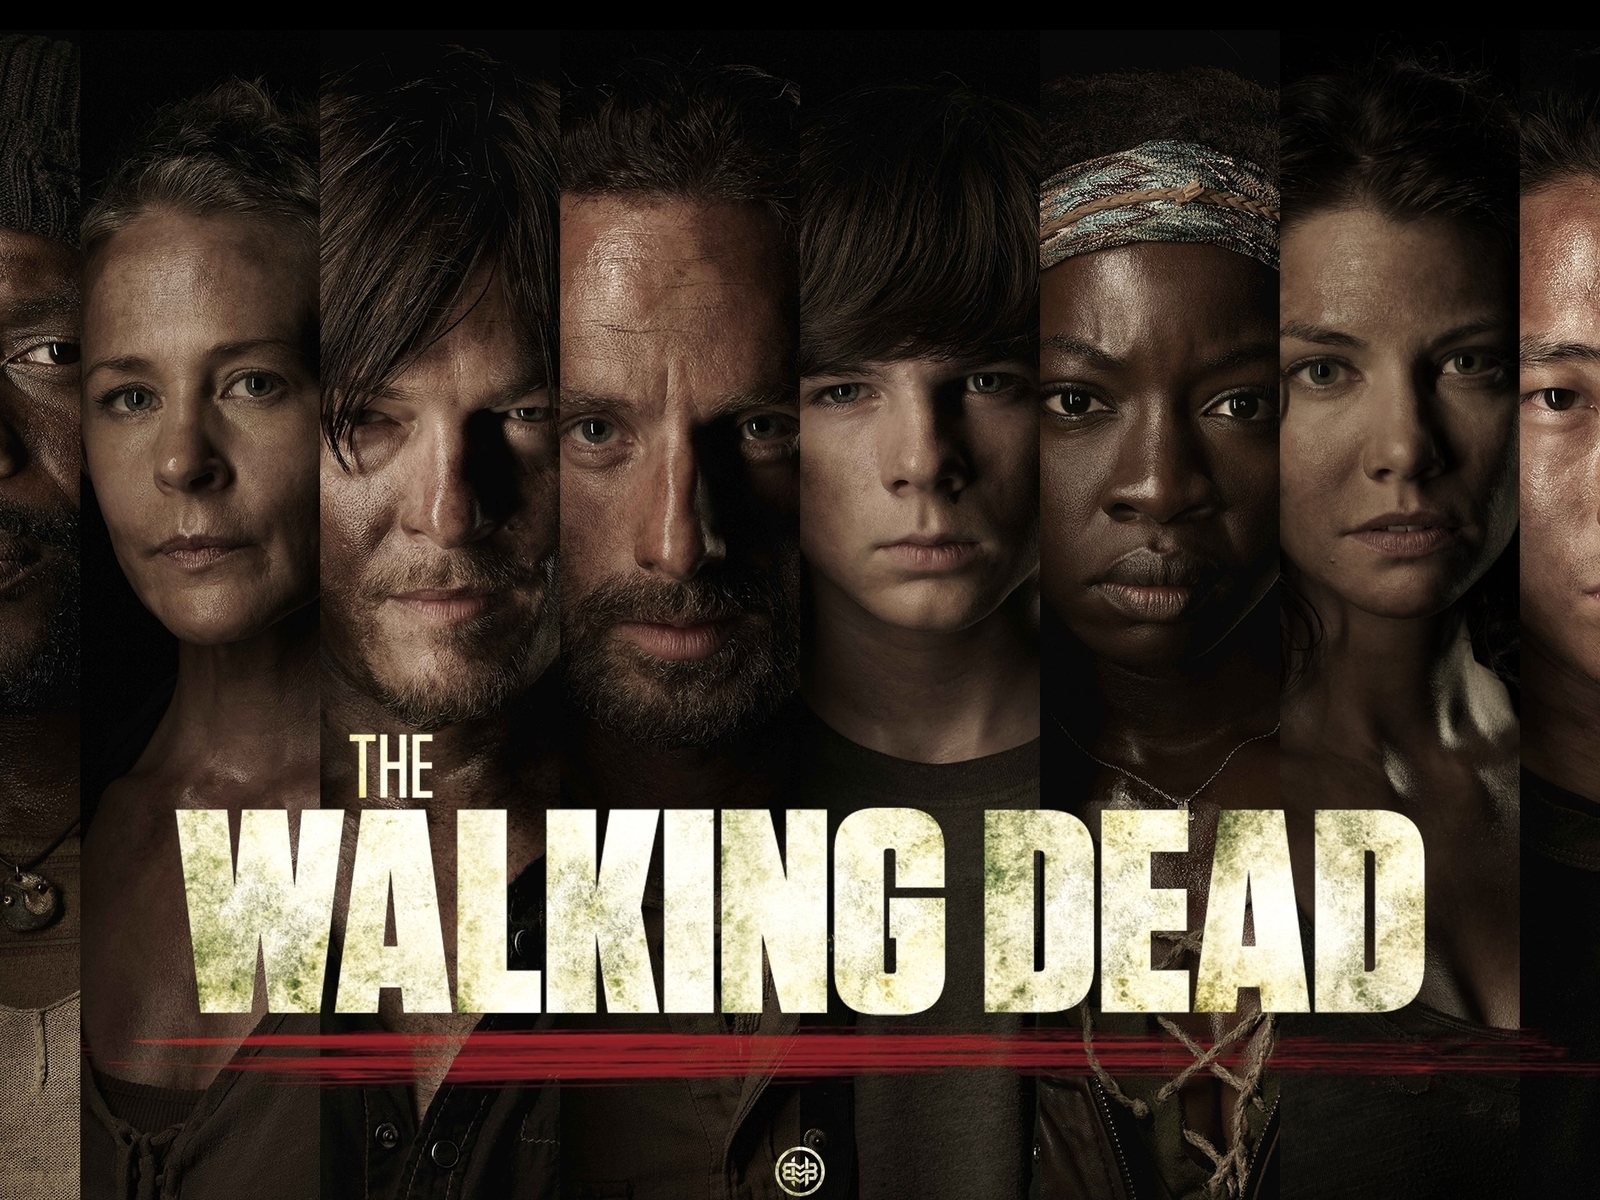 The Walking Dead Characters Poster for 1600 x 1200 resolution